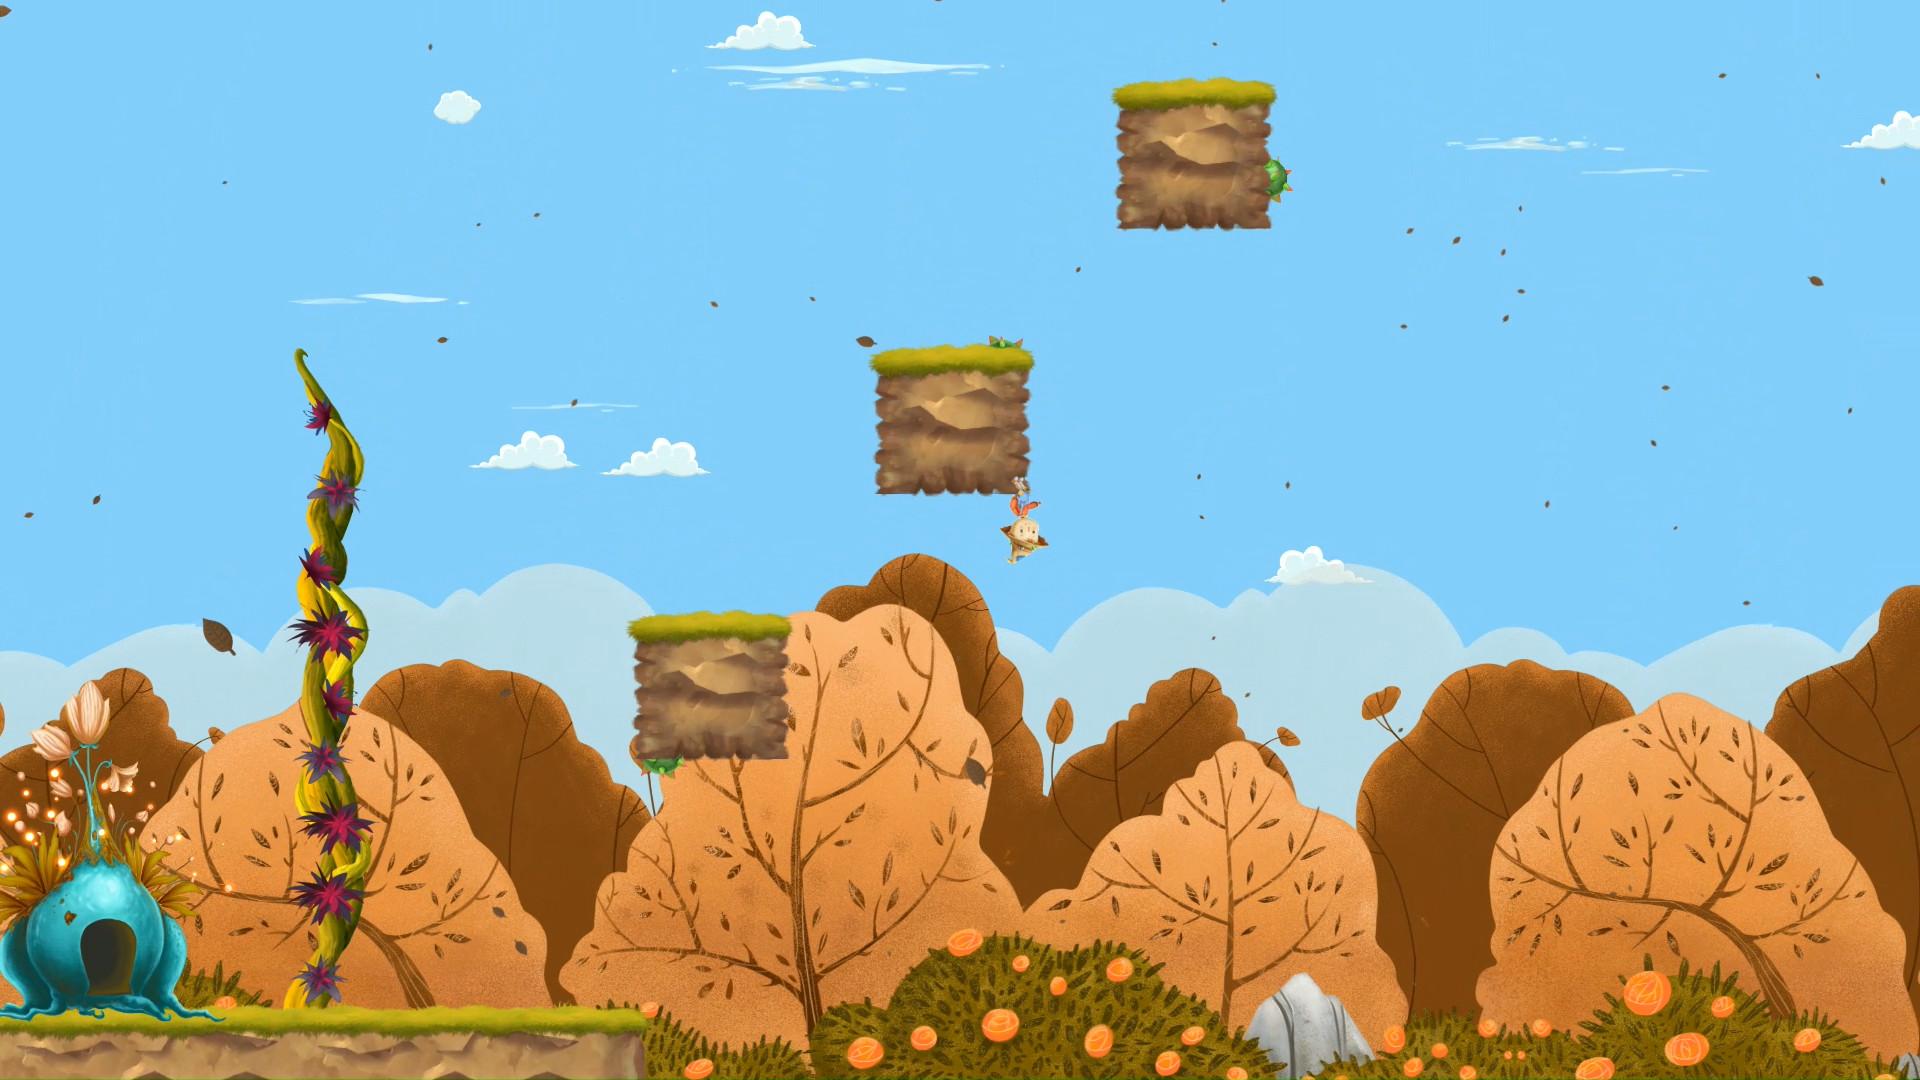 Screenshot №4 from game Upside Down